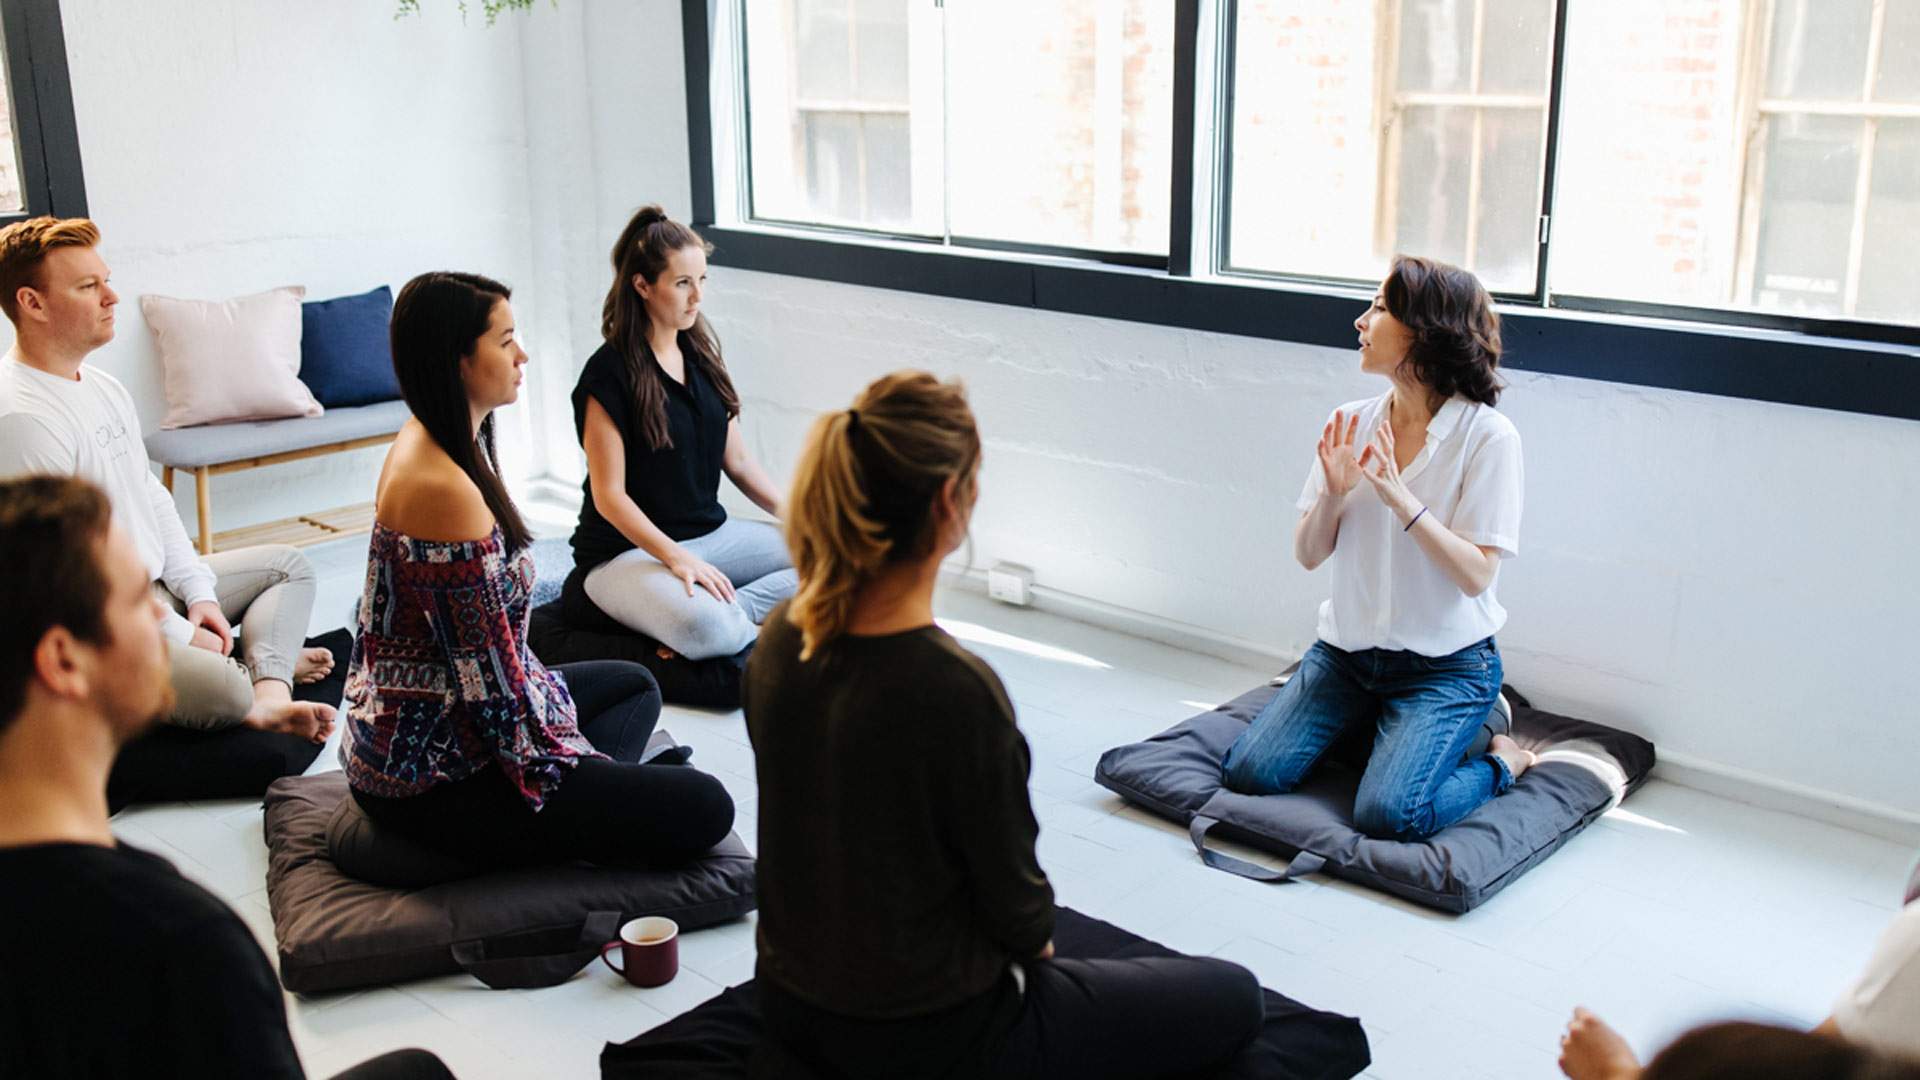 KNDRD Is Melbourne CBD's New Drop-In Meditation and Mindfulness Studio